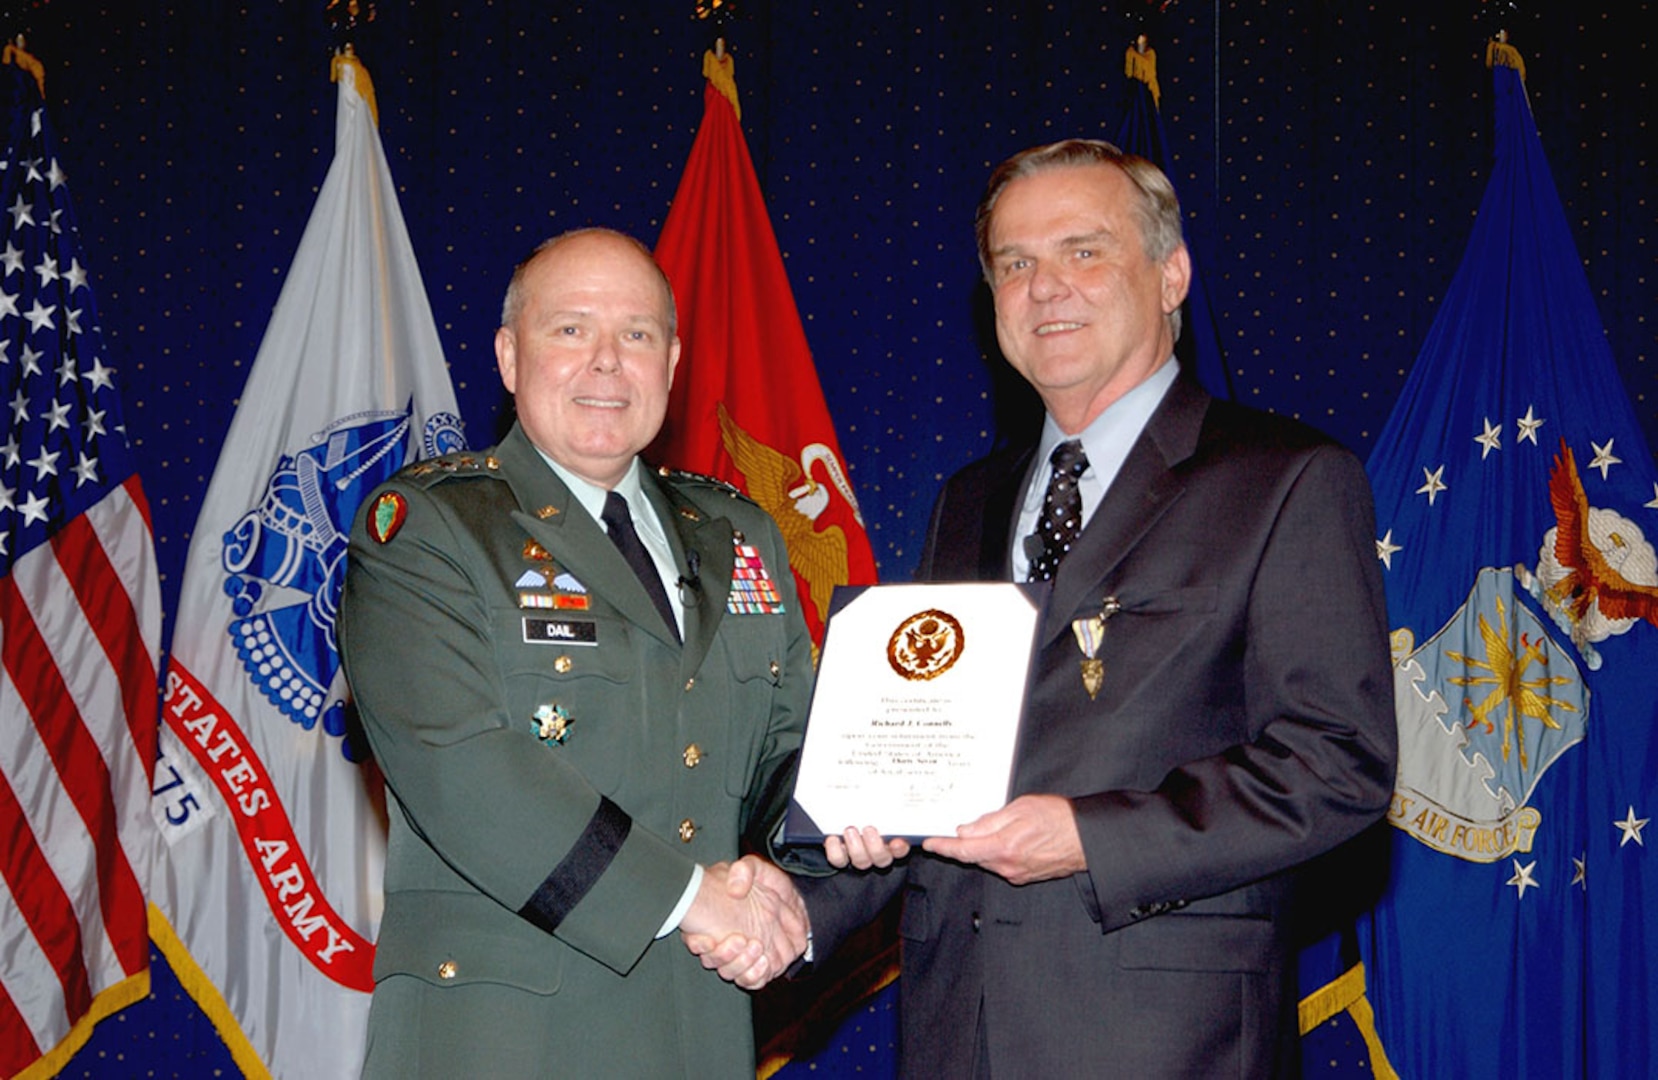 DLA Hall of Fame inductee Richard Connelly, right, at his retirement ceremony in 2007 with then-DLA Director Army Lt. Gen. Robert Dail, who is also a 2014 inductee. 